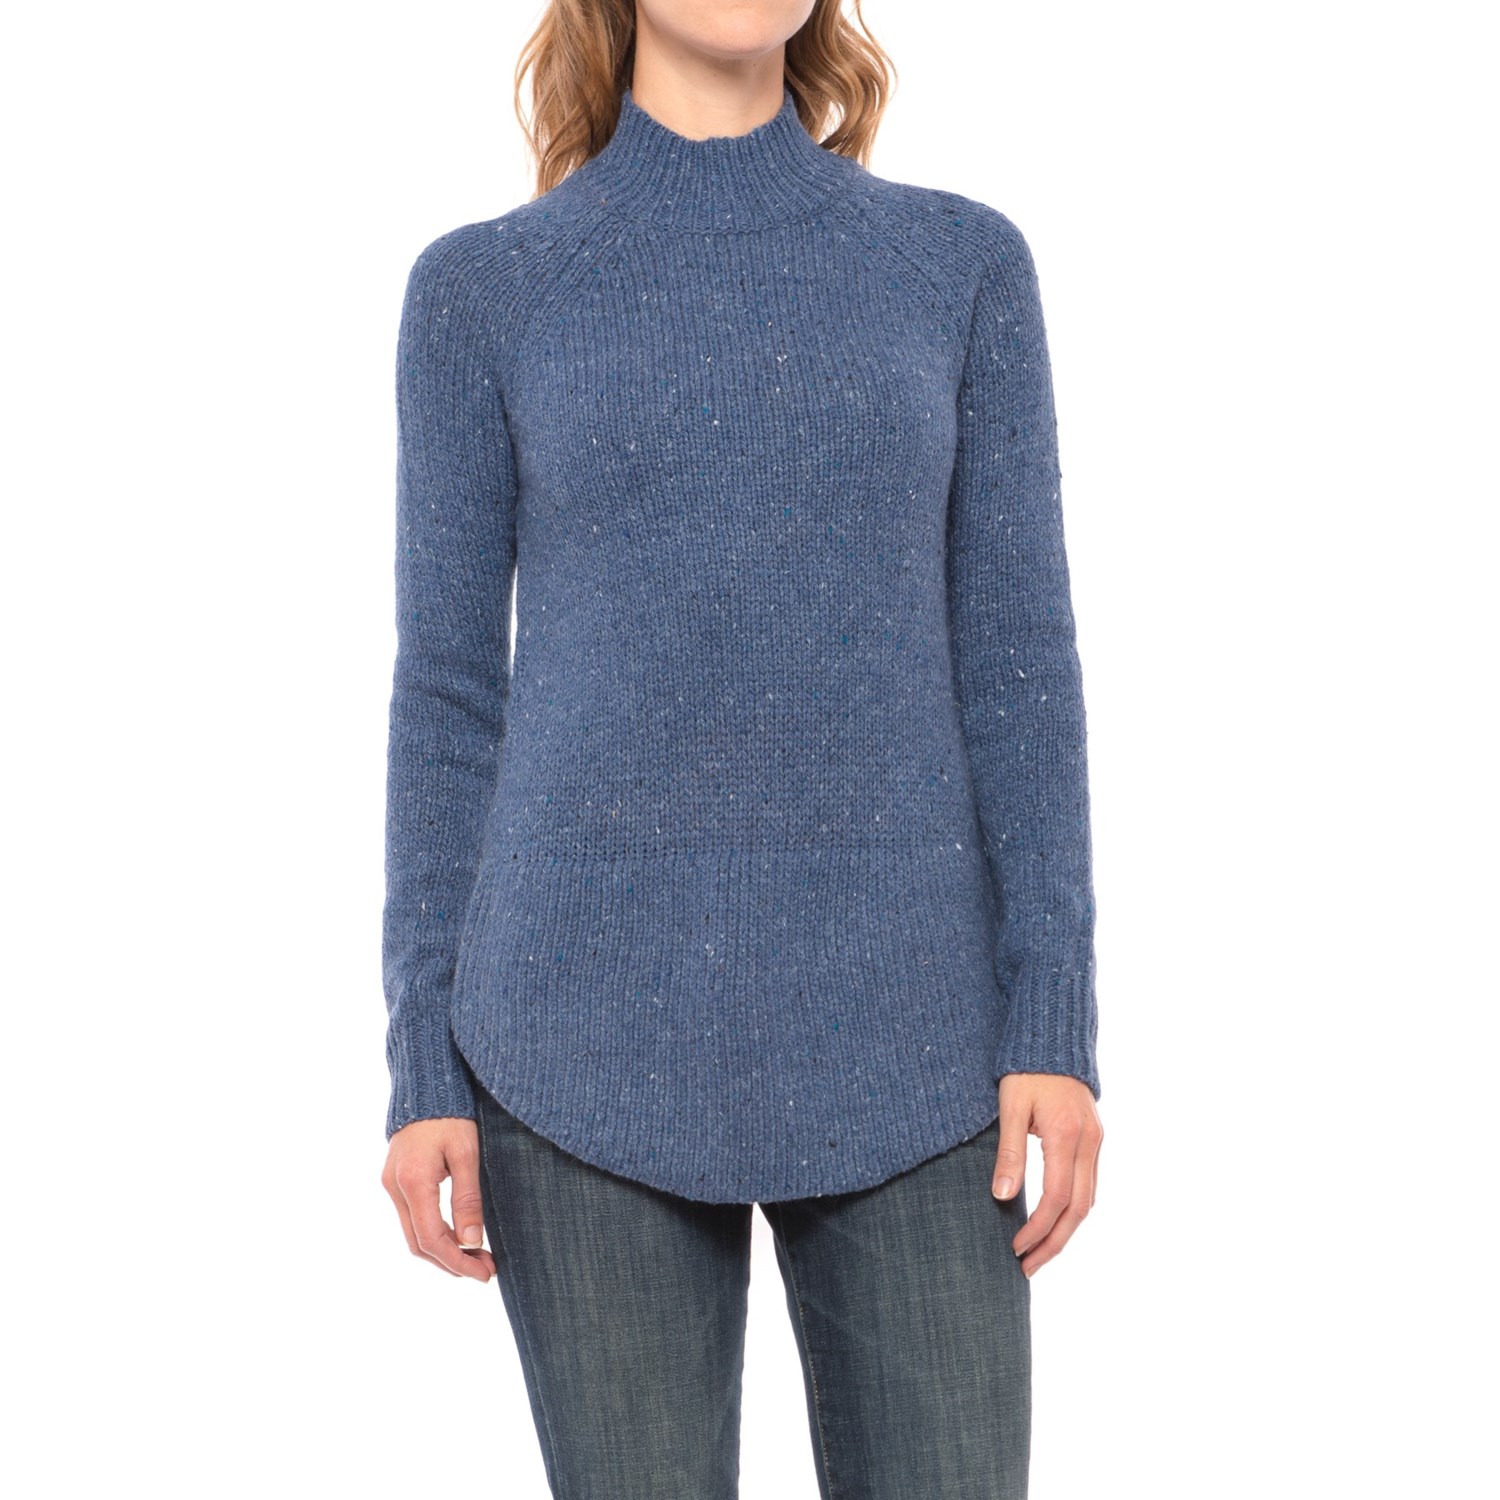 Cynthia Rowley Donegal Button-Back Tunic Sweater (For Women) - Save 60%